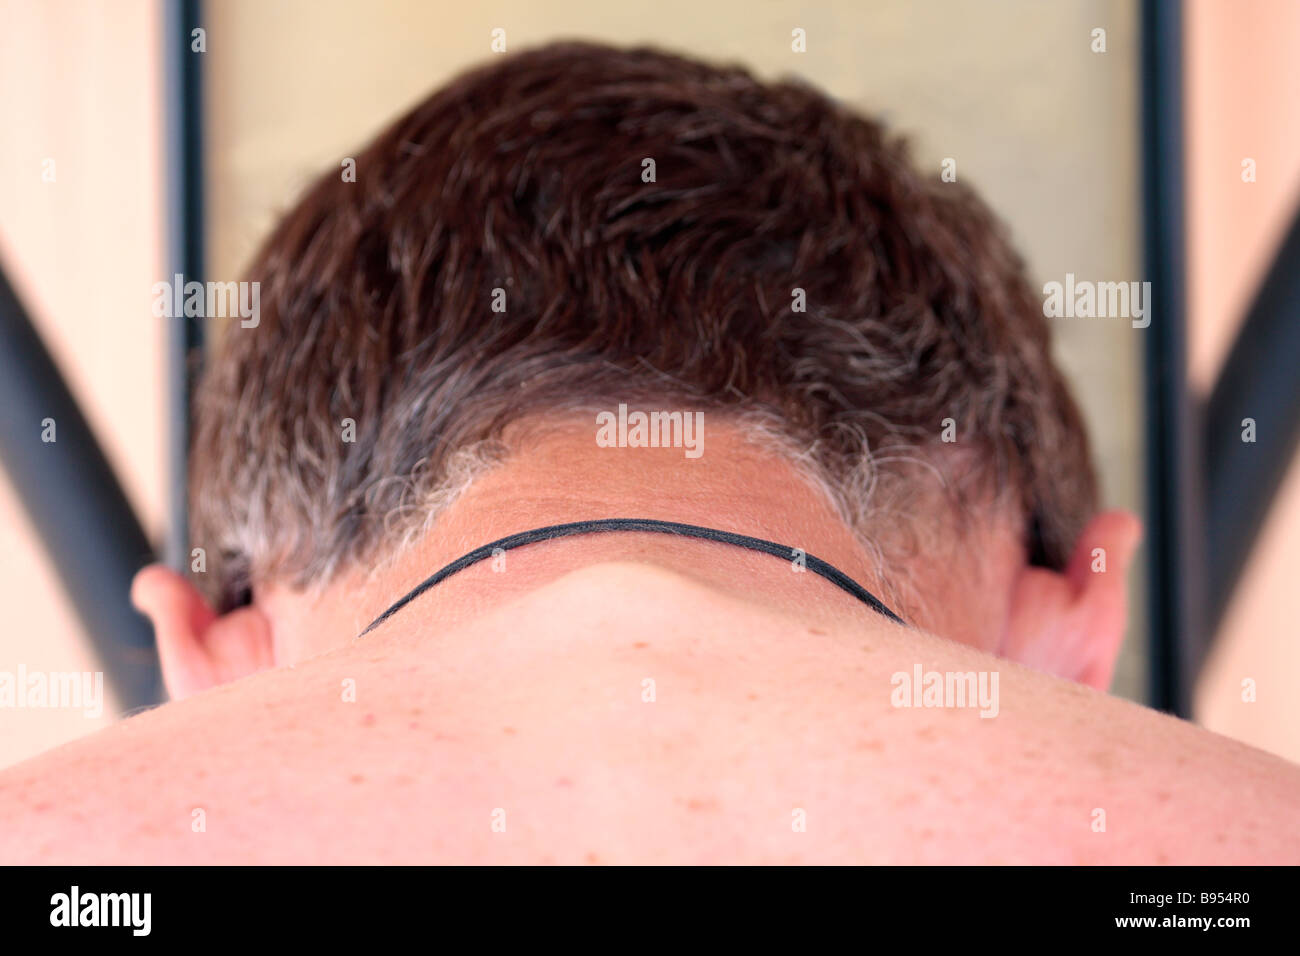 Man bowing head Stock Photo